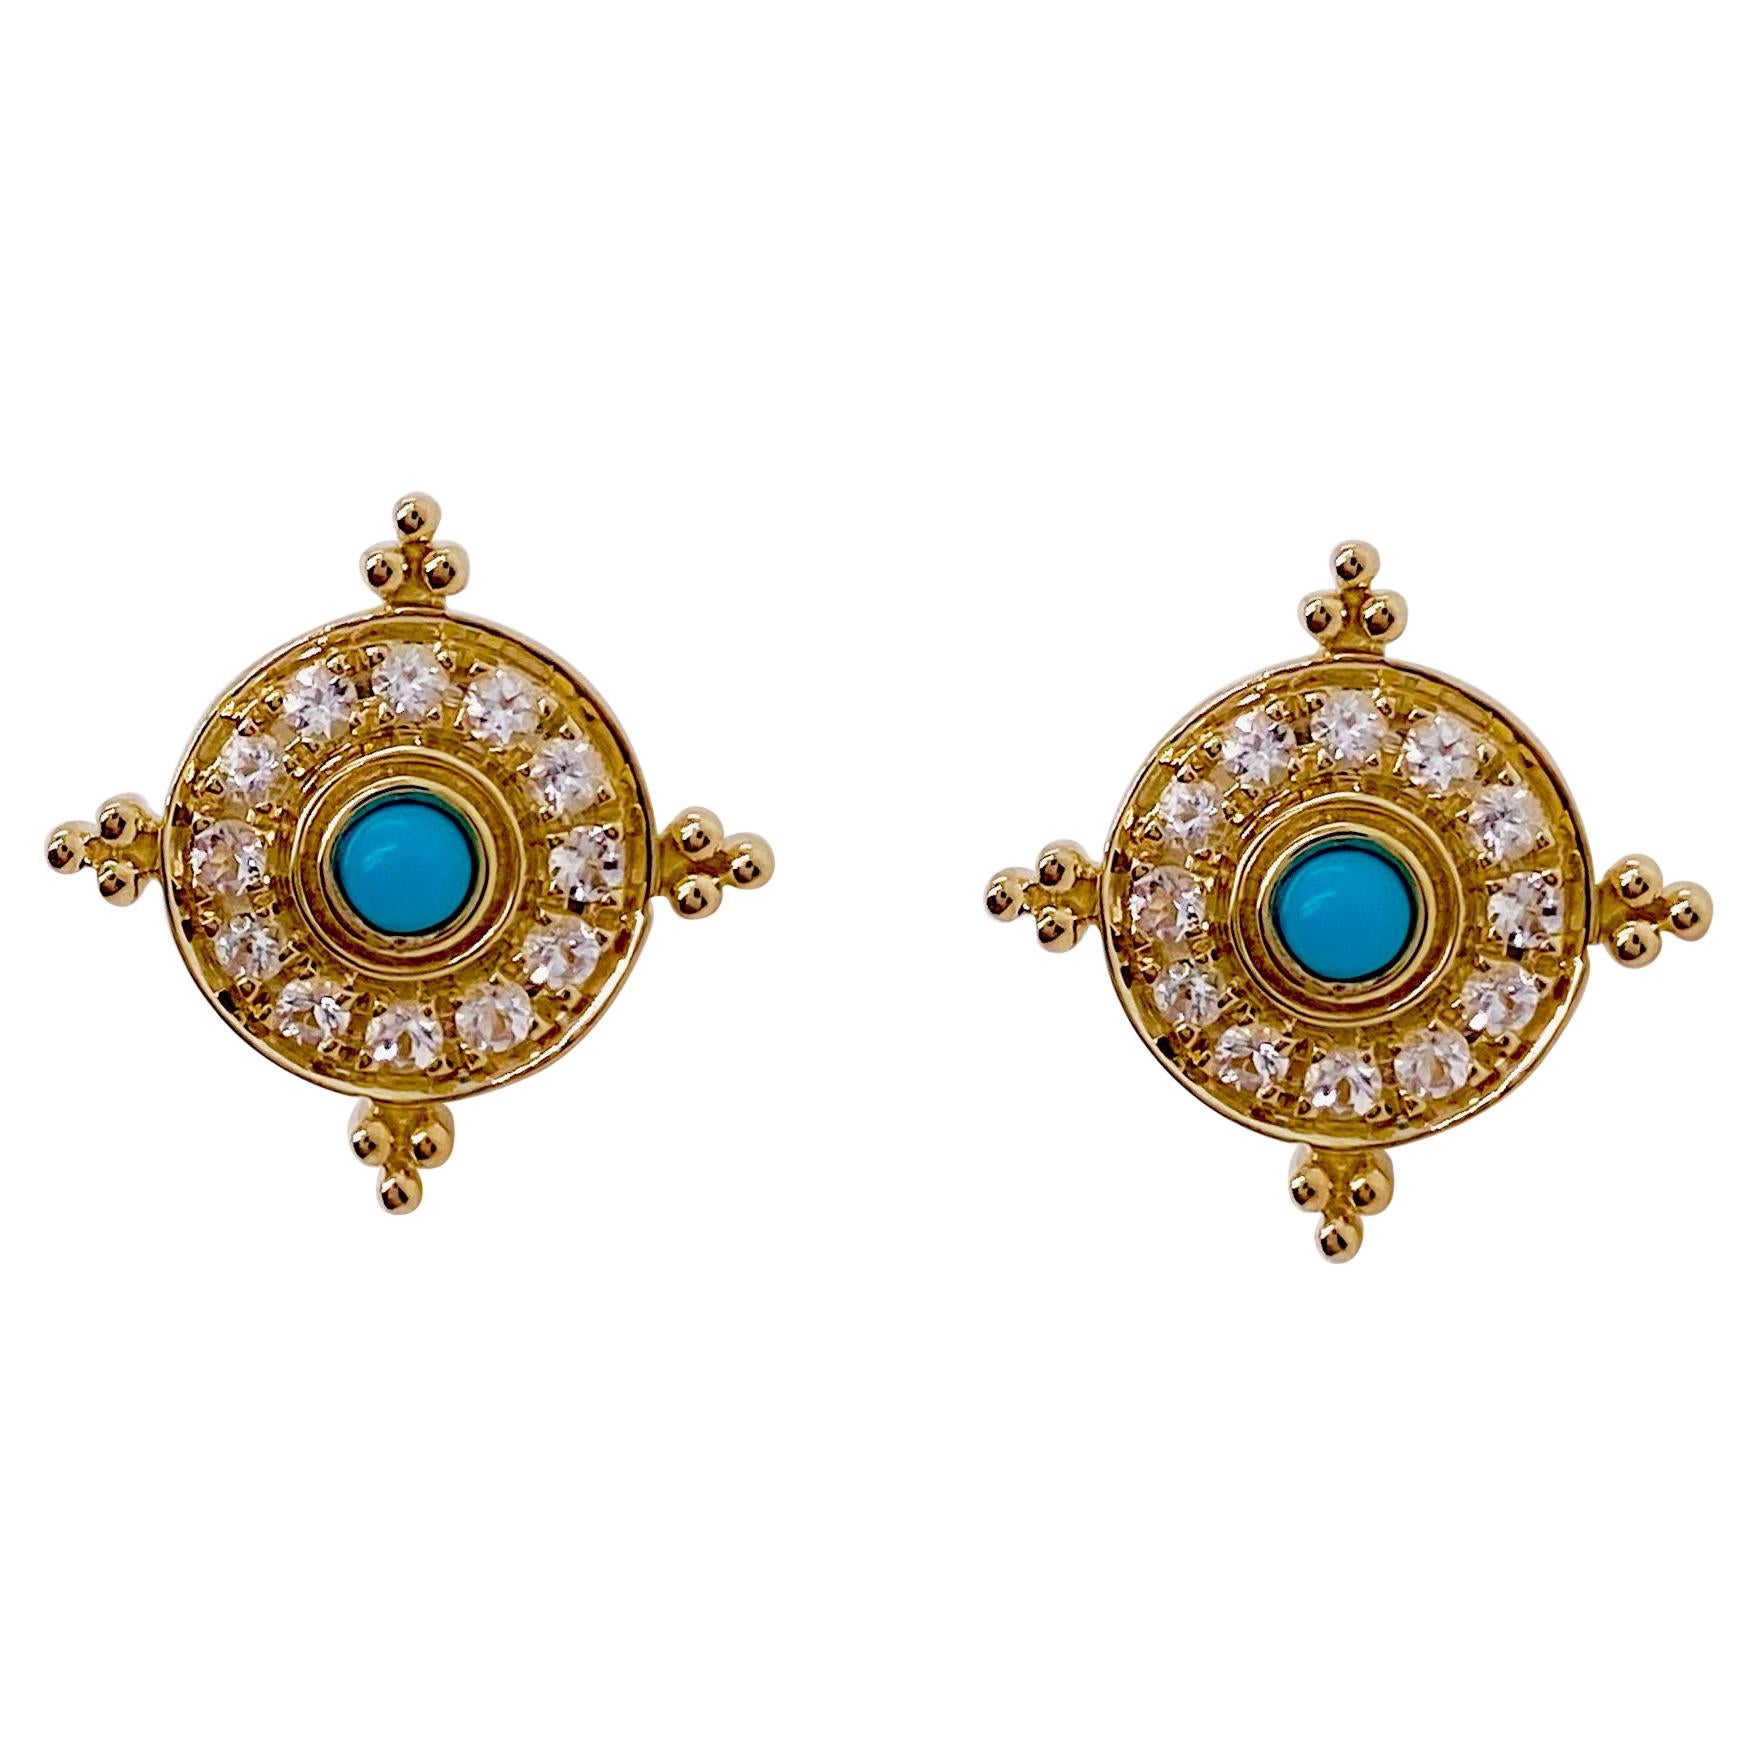 Etruscan Turquoise Earring Surrounded by Brilliant White Topaz in 14k Gold